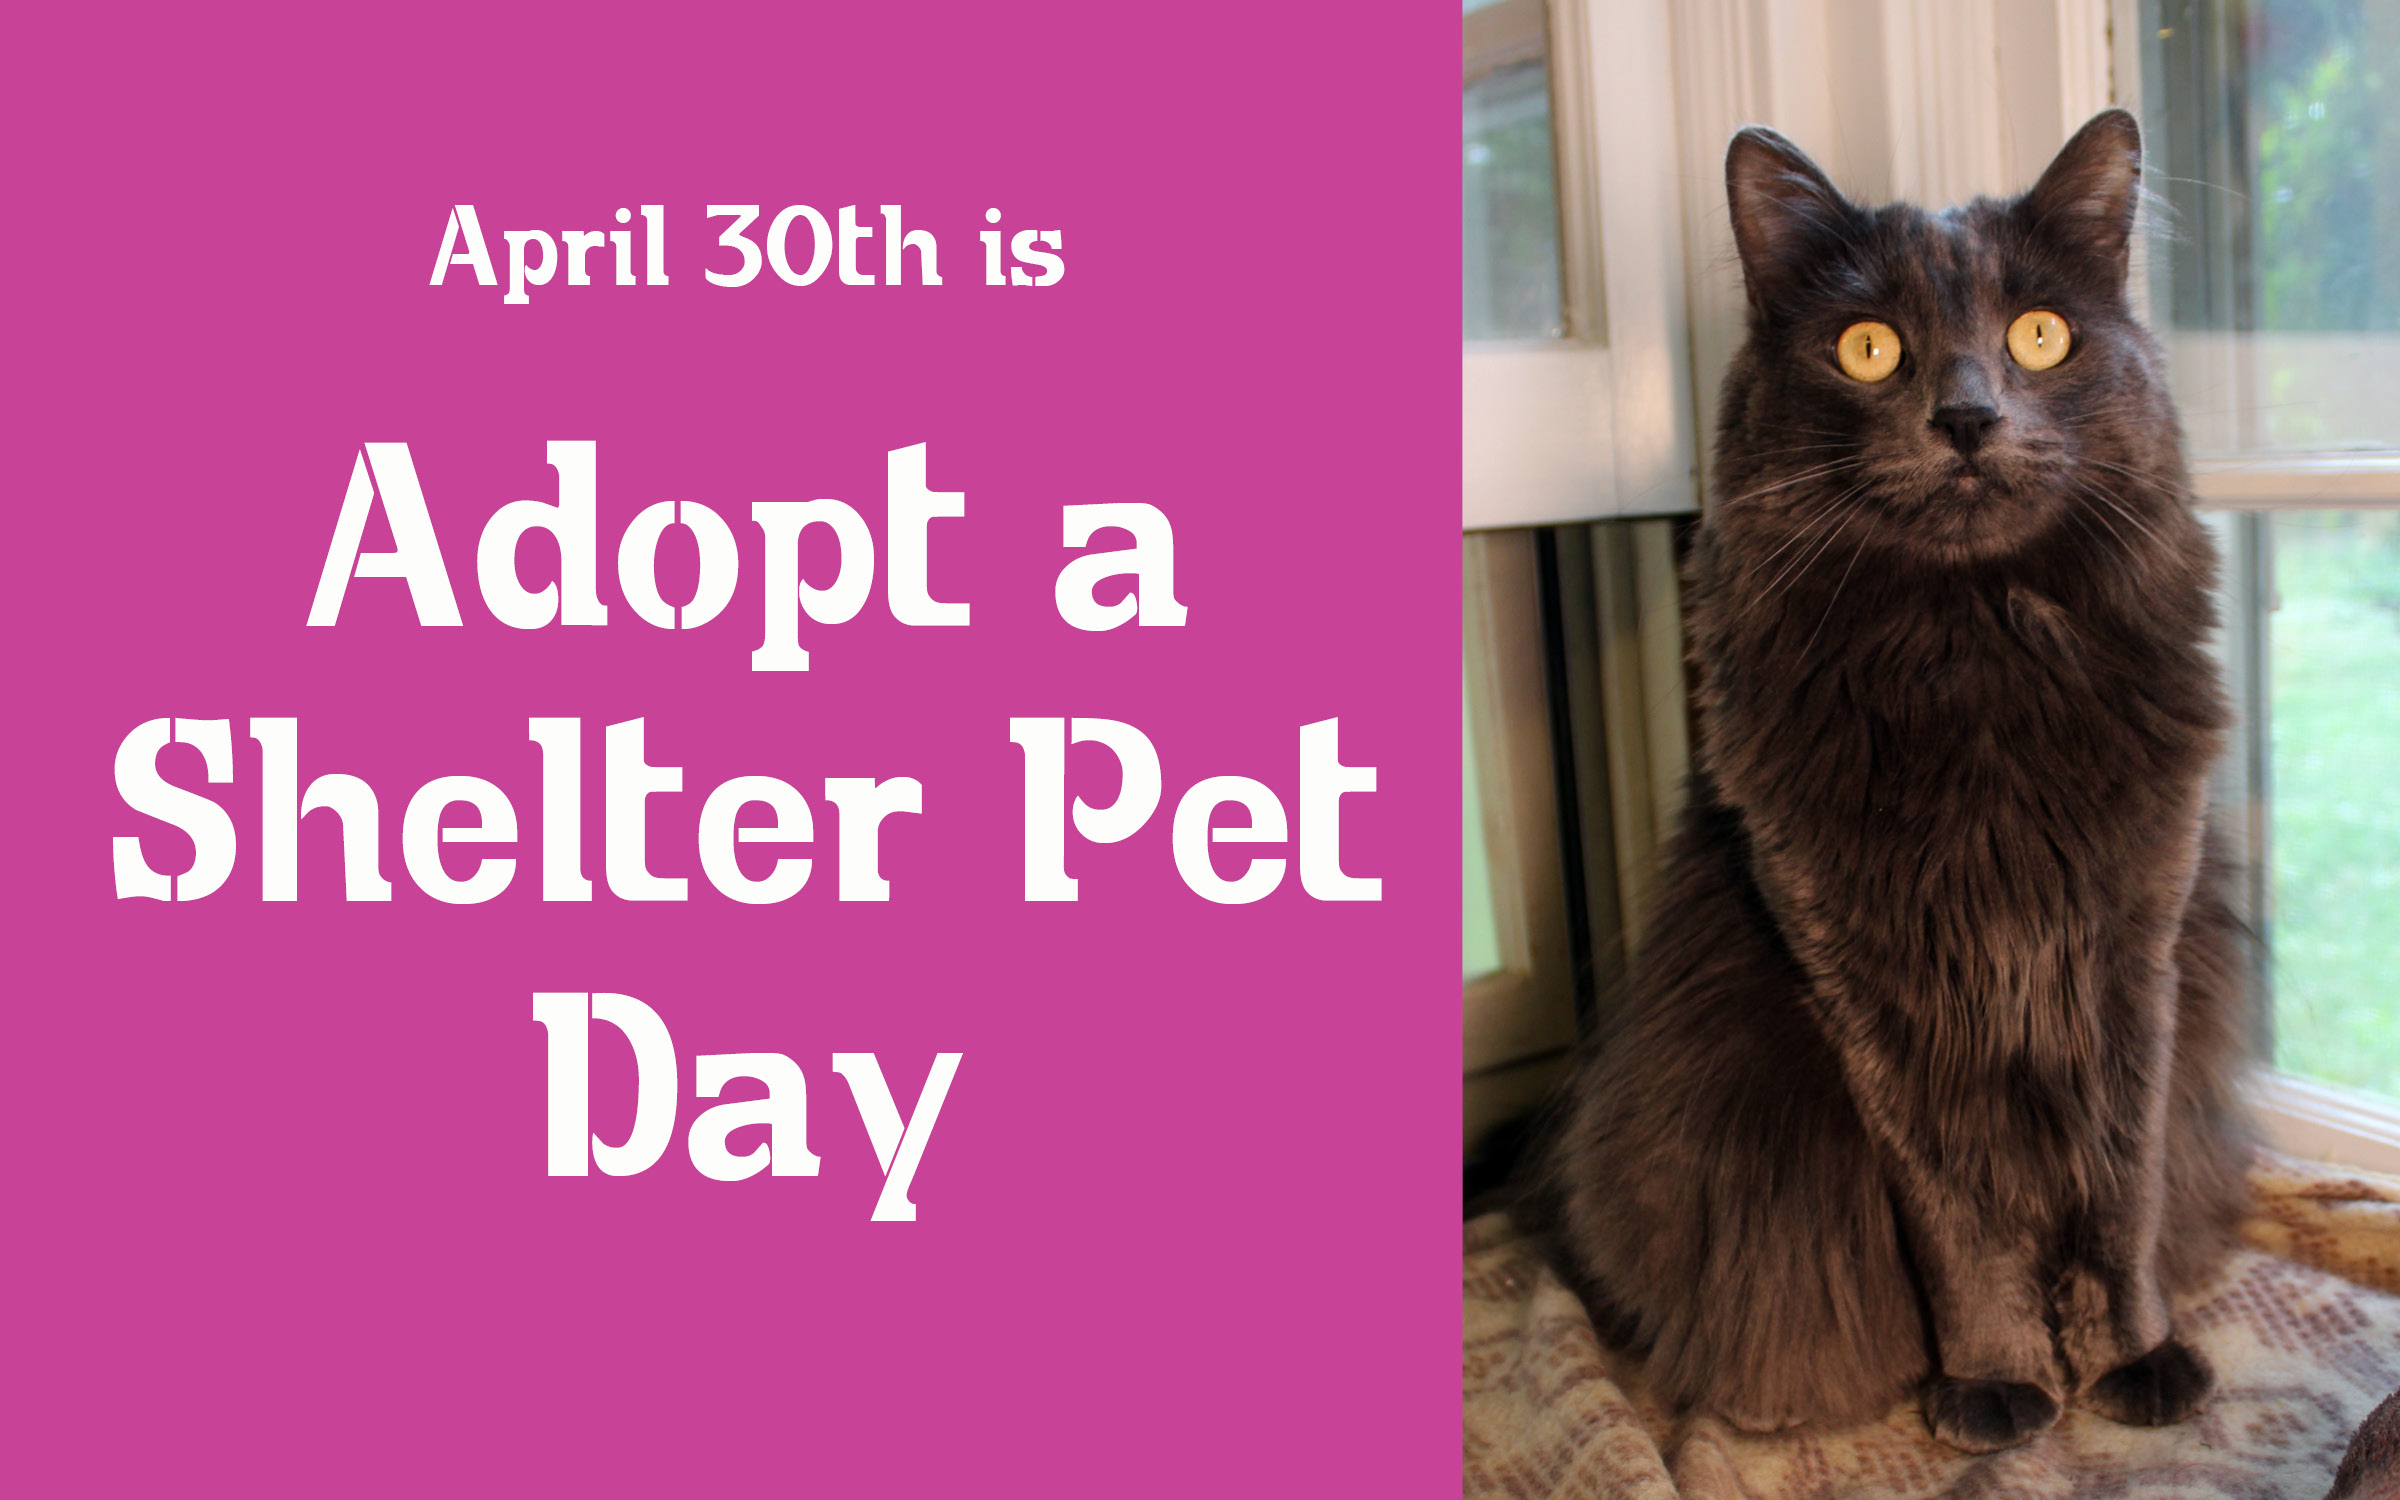 Act on Adopt a Shelter Pet Day